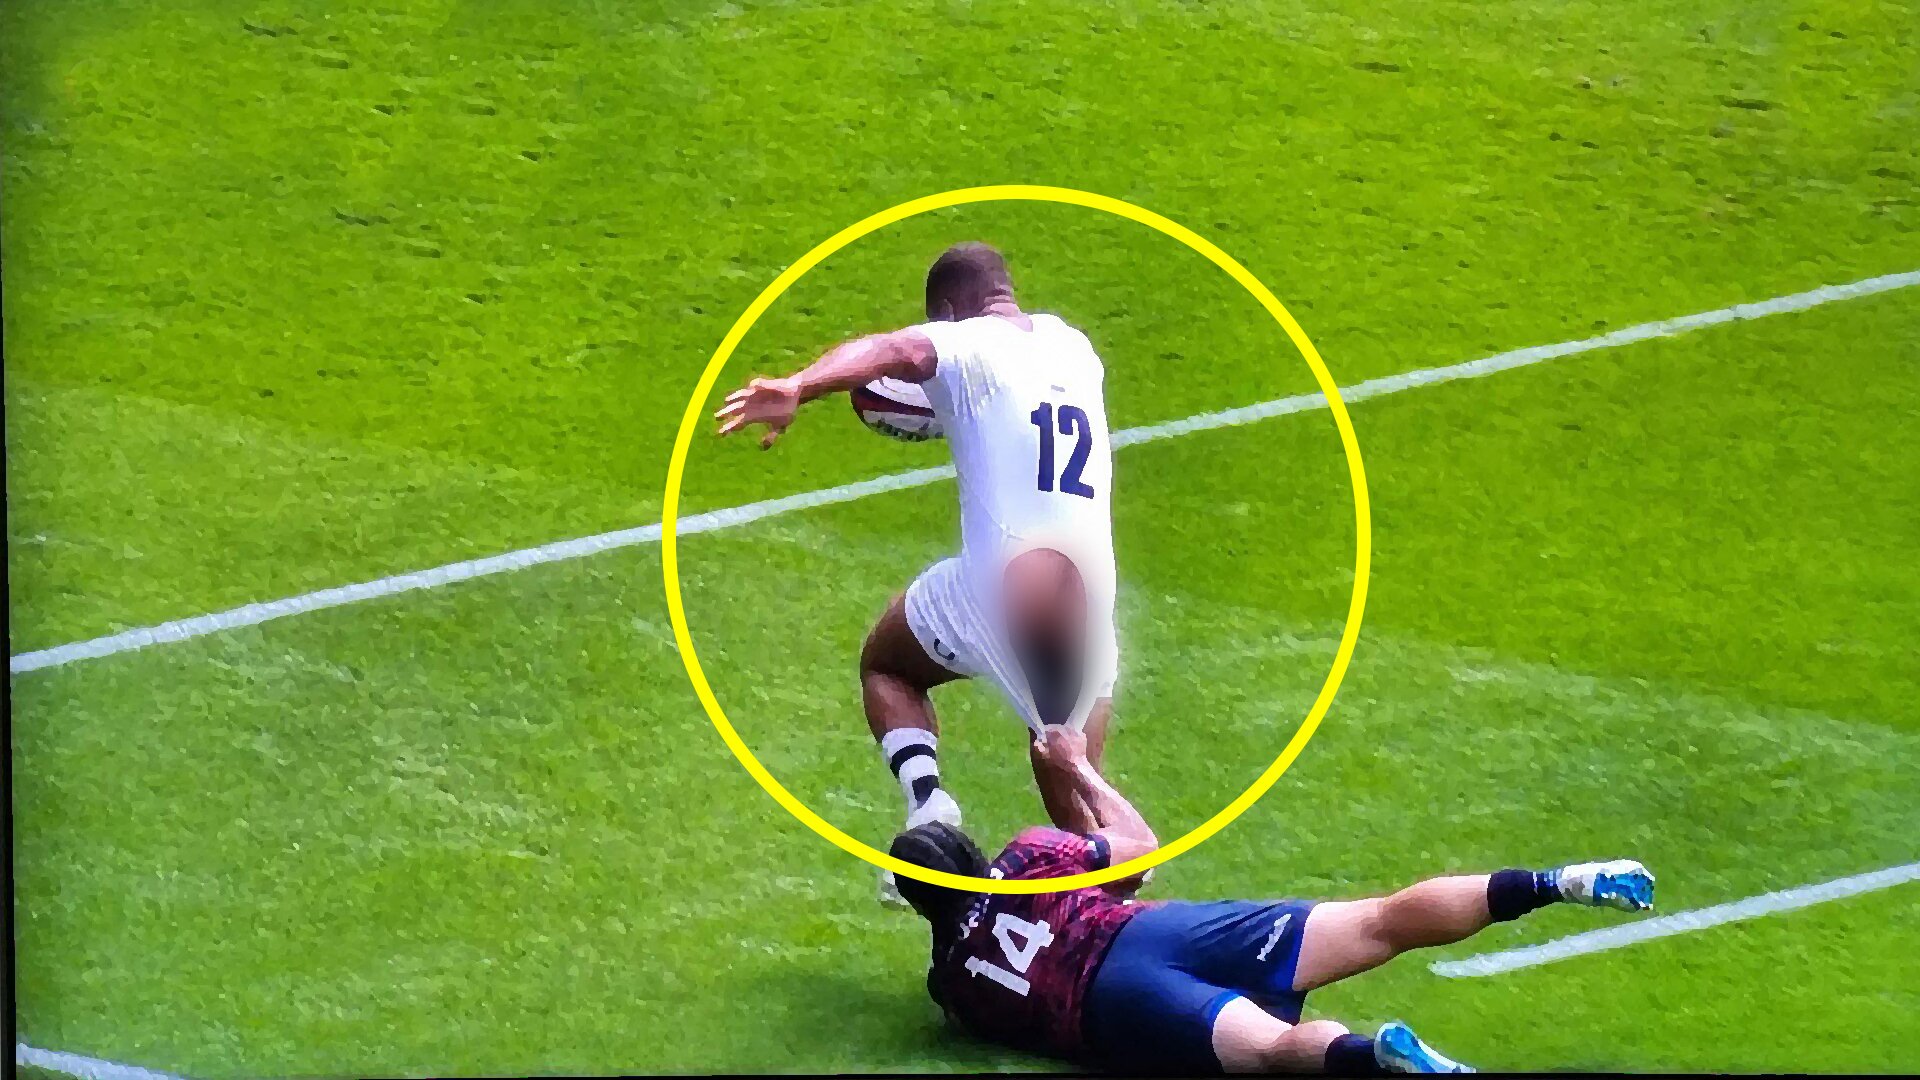 Ollie Lawrence suffers wardrobe malfunction on first try for England rugby